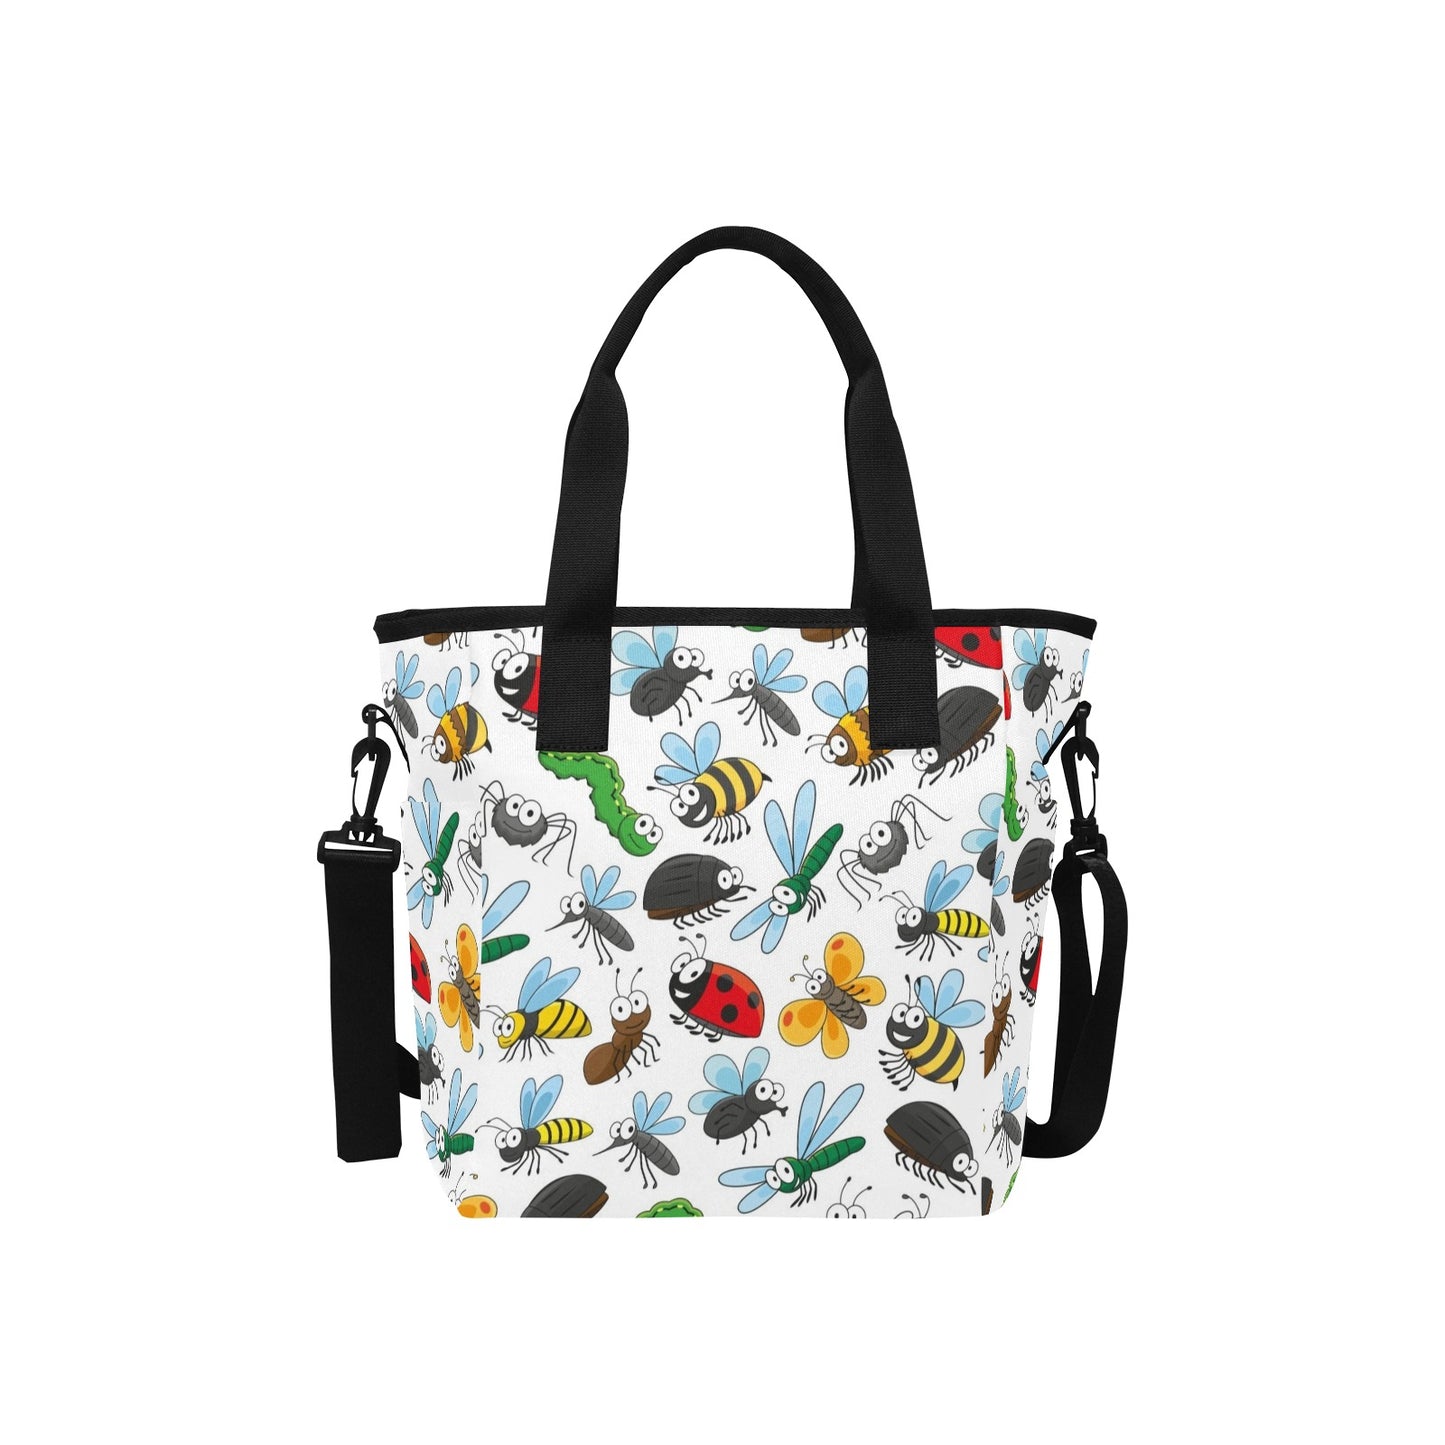 Little Creatures - Tote Bag with Shoulder Strap Nylon Tote Bag